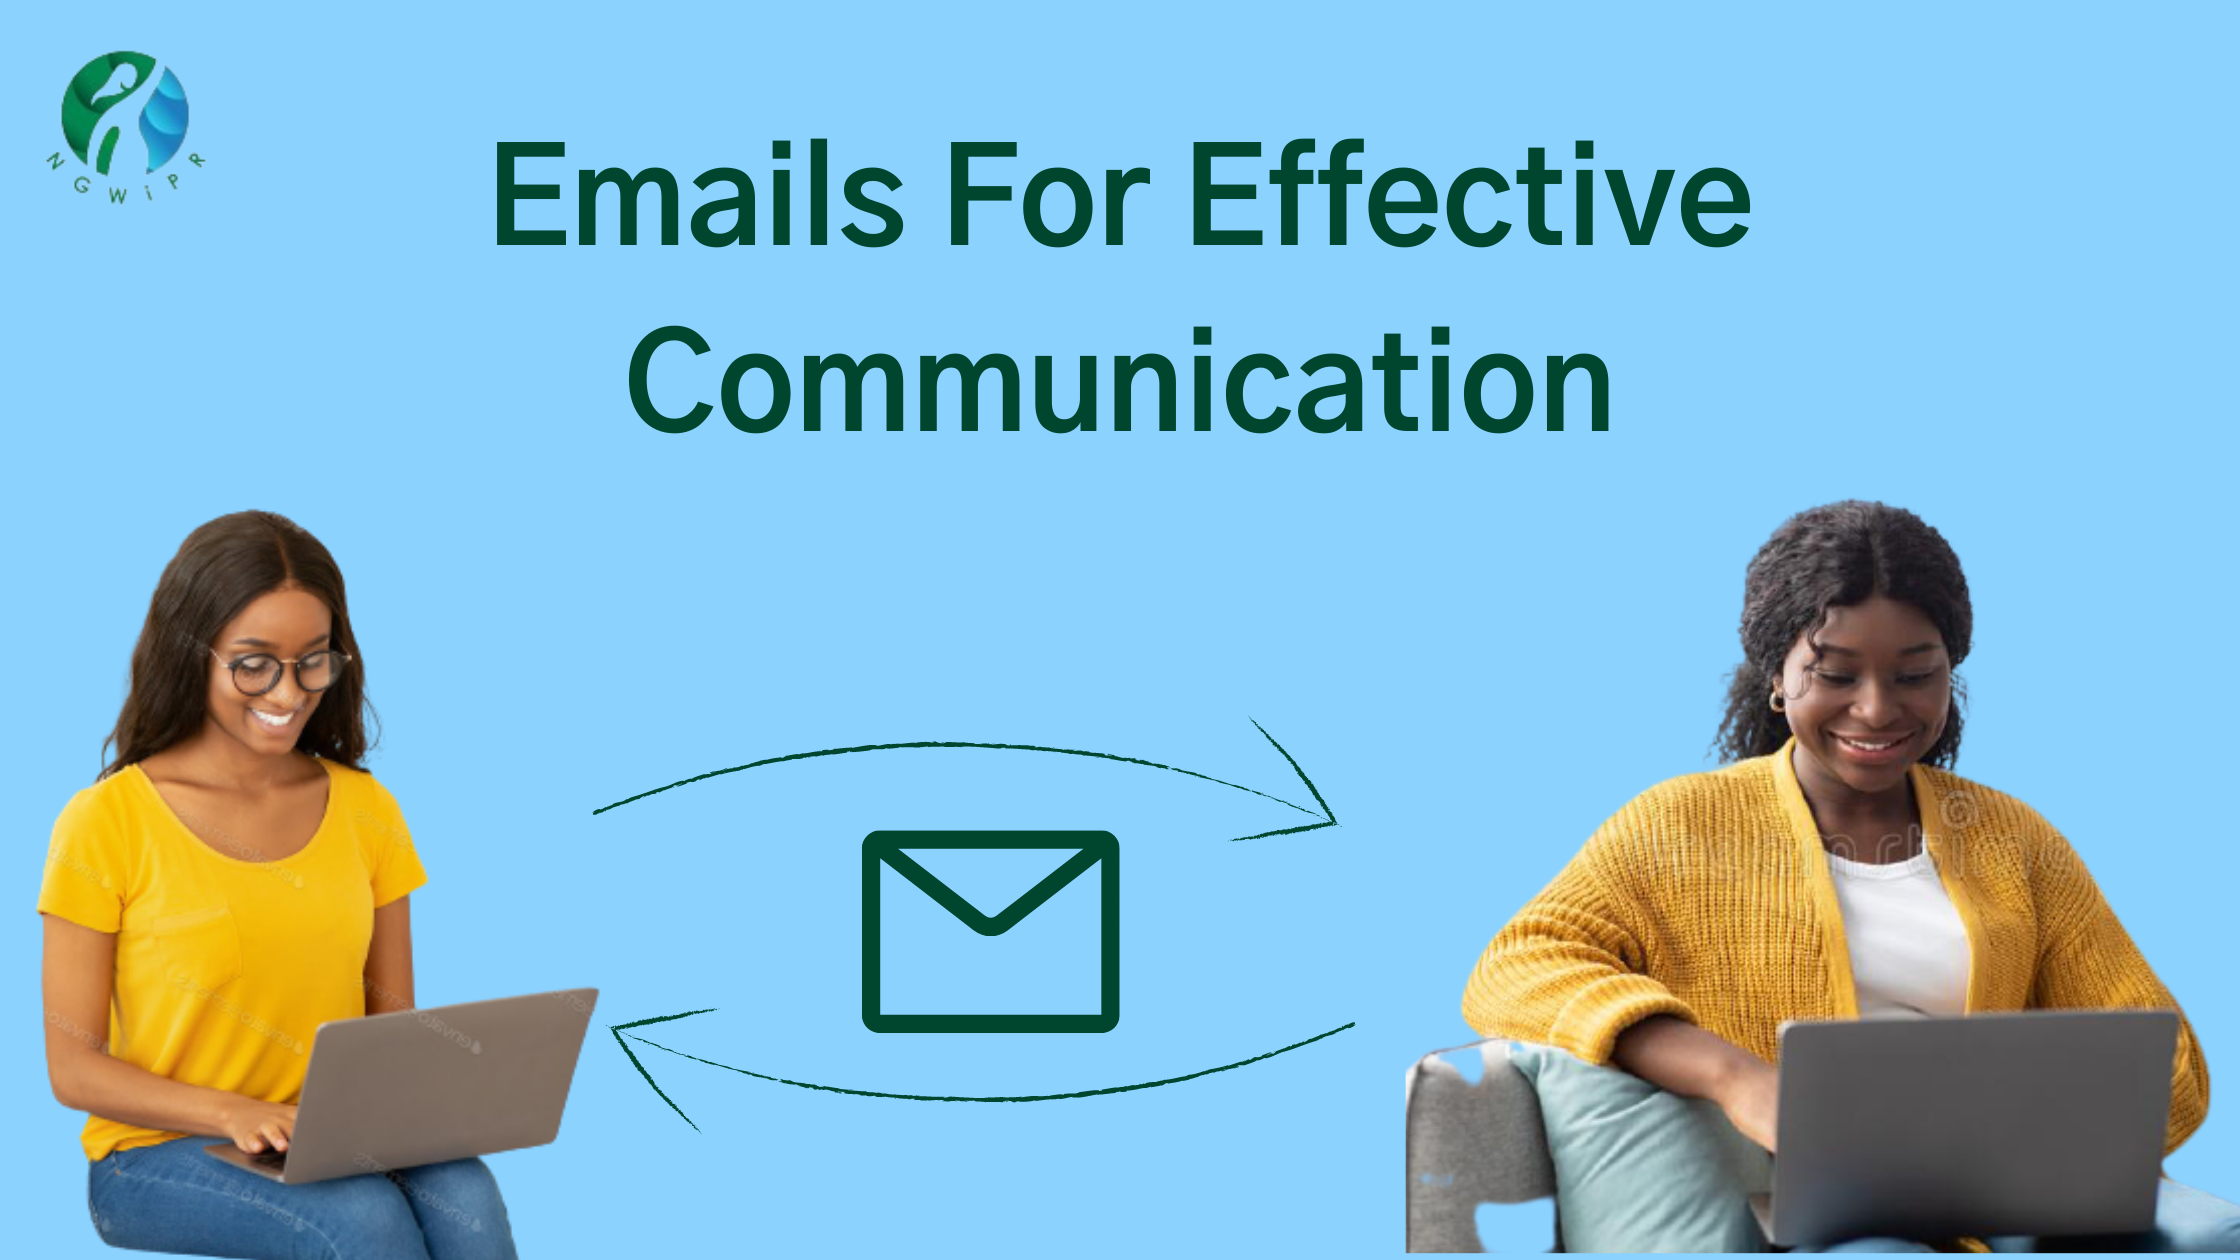 Emails for Effective Communication